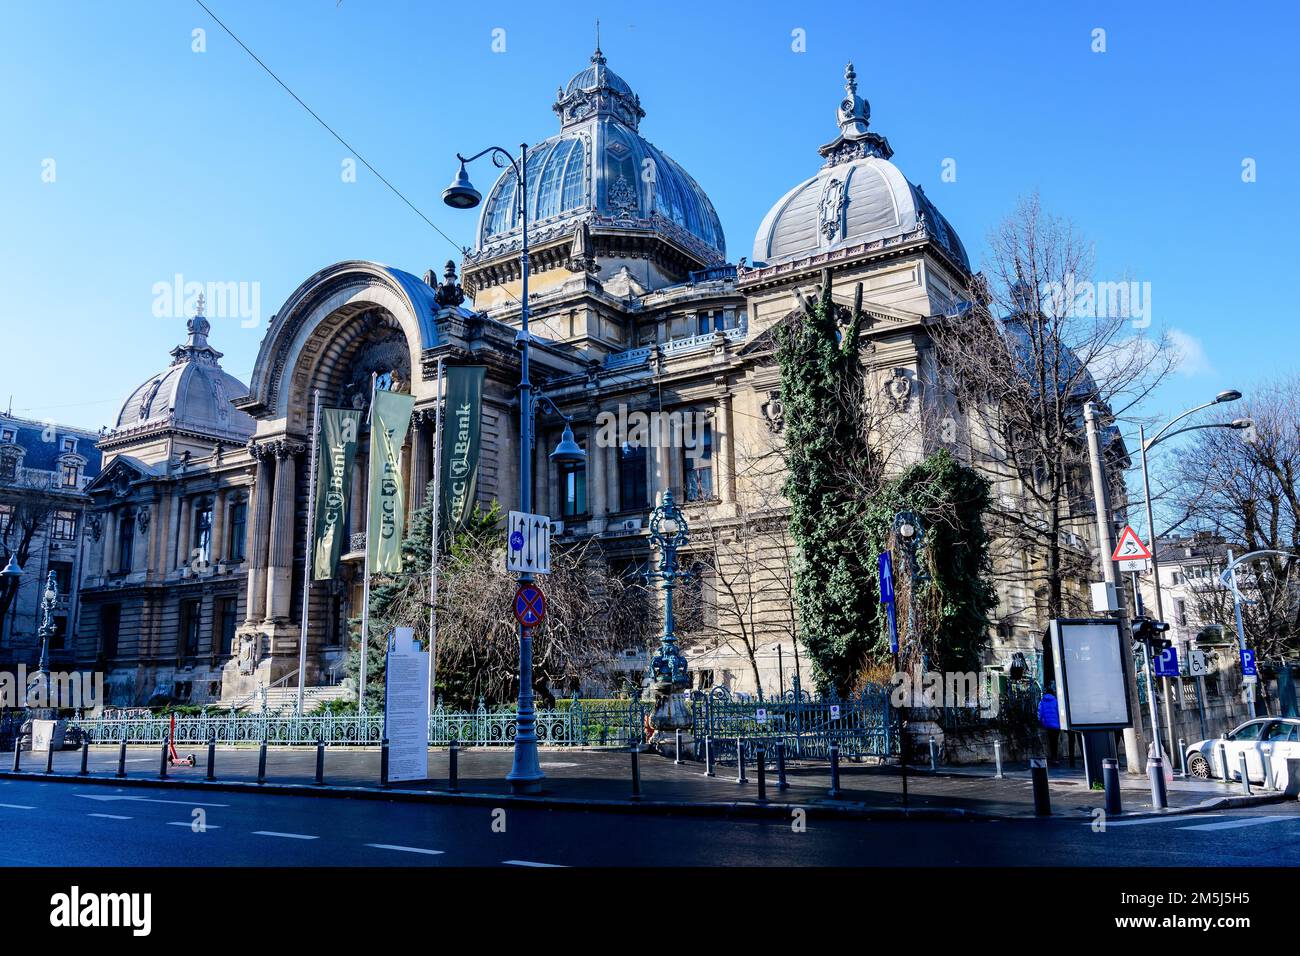 Bucharest, Romania, 2 January 2022: The beautiful facade of the Cec Palace in Calea Victoriei (Victoriei Avenue) in the historic center of Bucharest, Stock Photo